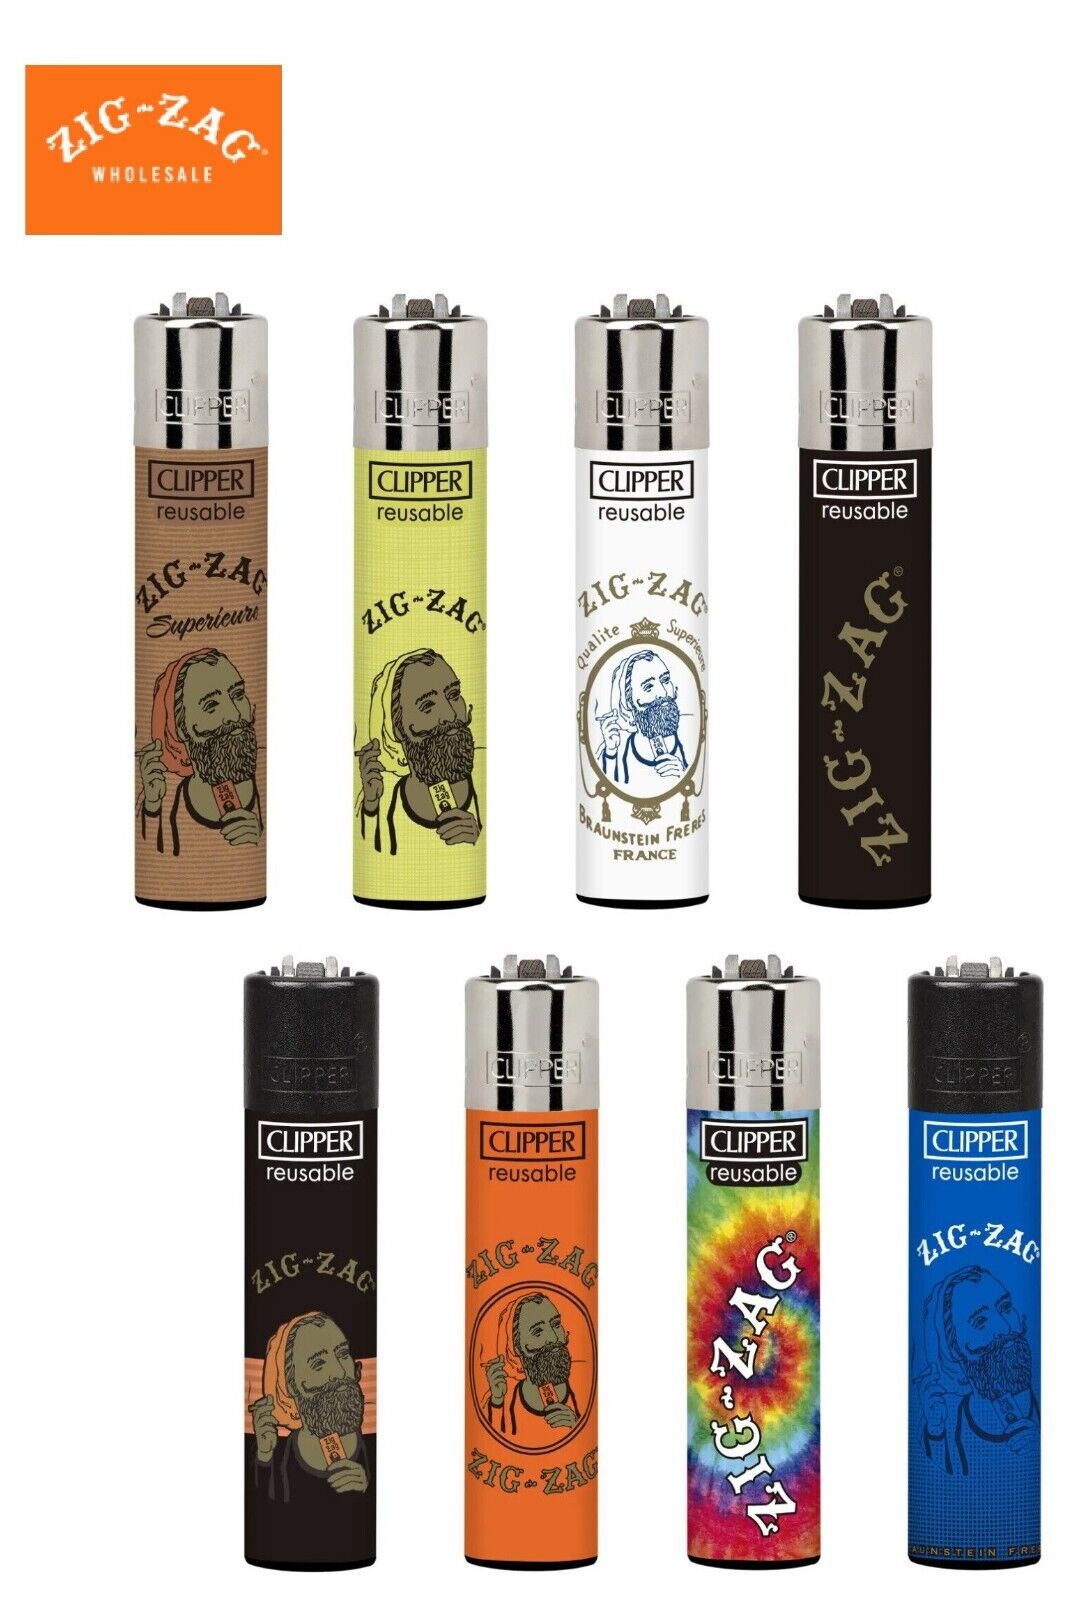 New ZIG-ZAG CLIPPER Reusable Lighters - The Complete Collection Set of 8